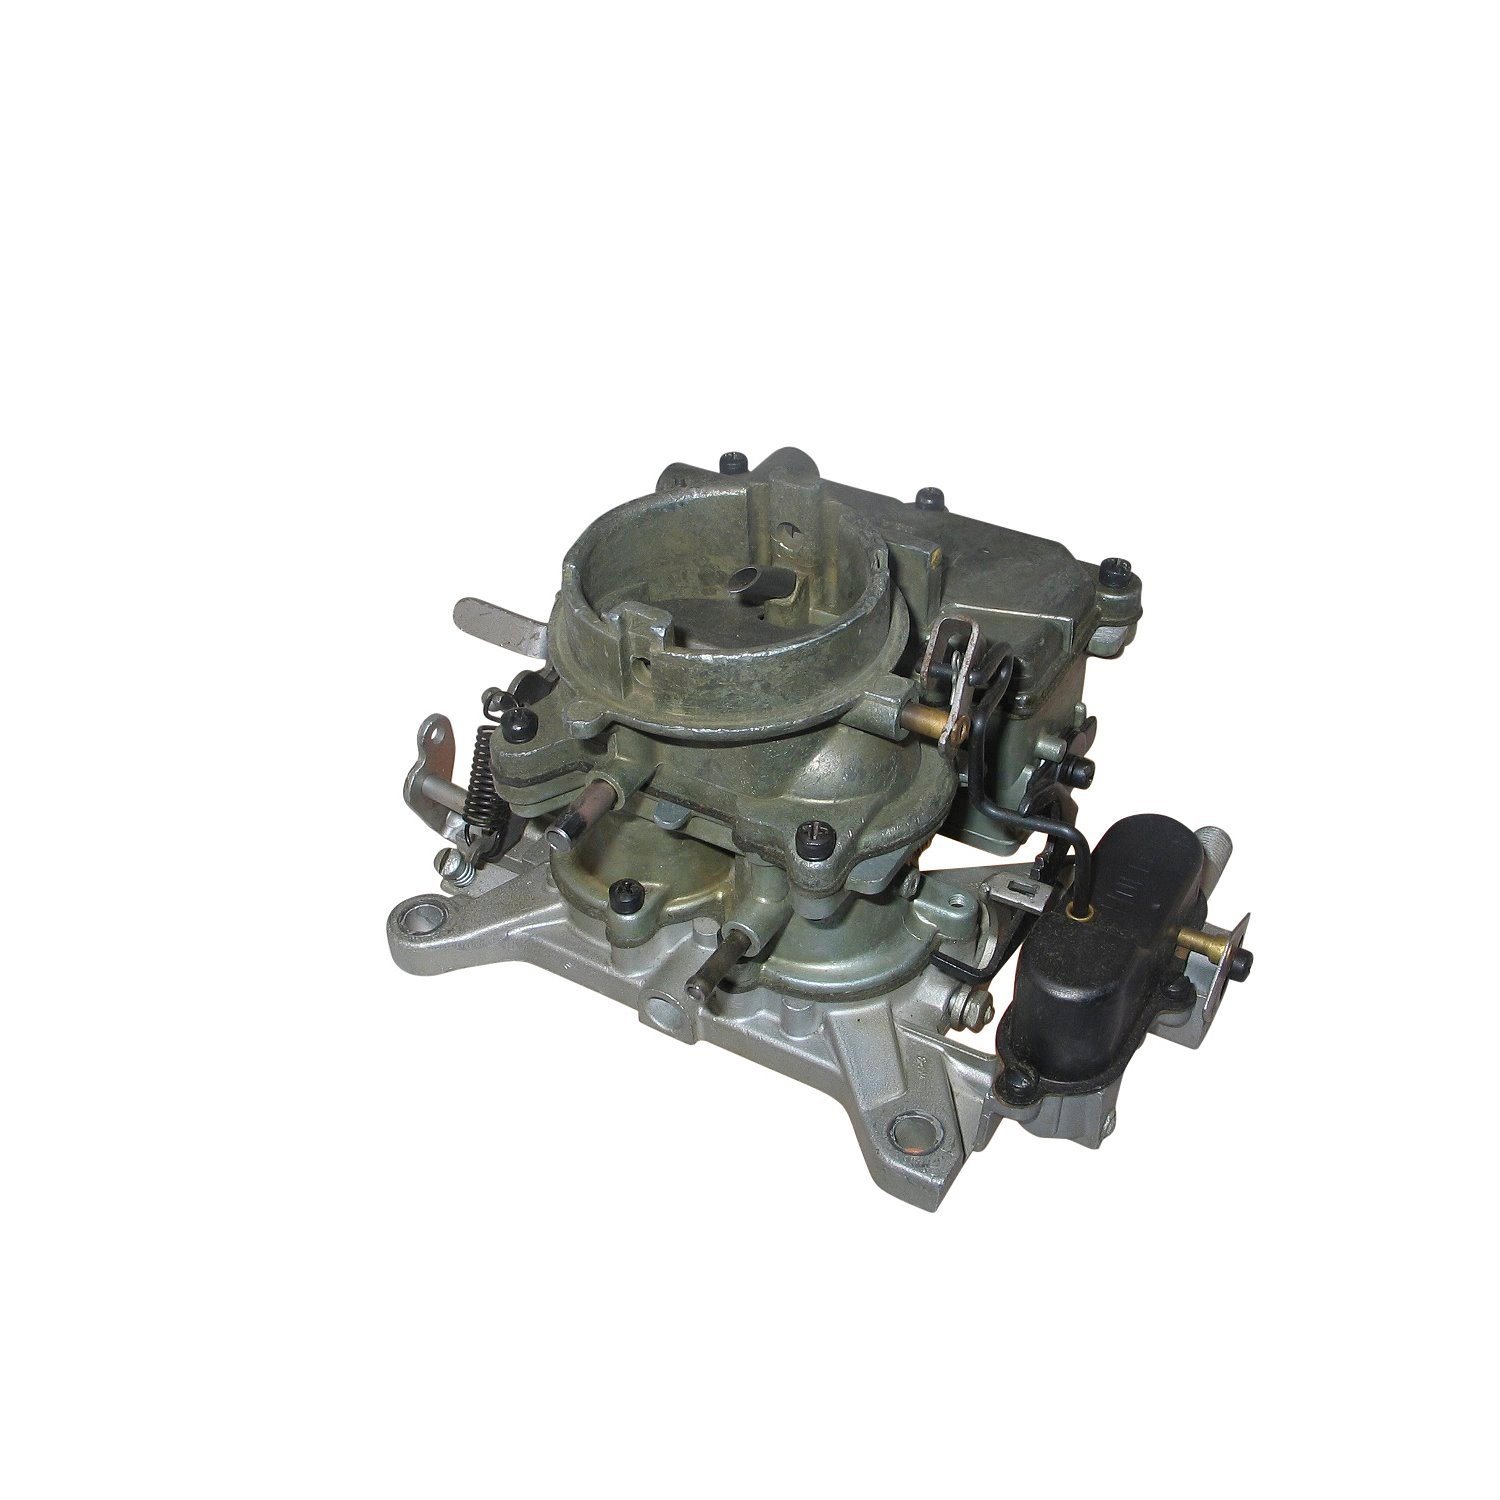 10-1051 Rochester Remanufactured Carburetor, 2209-Style